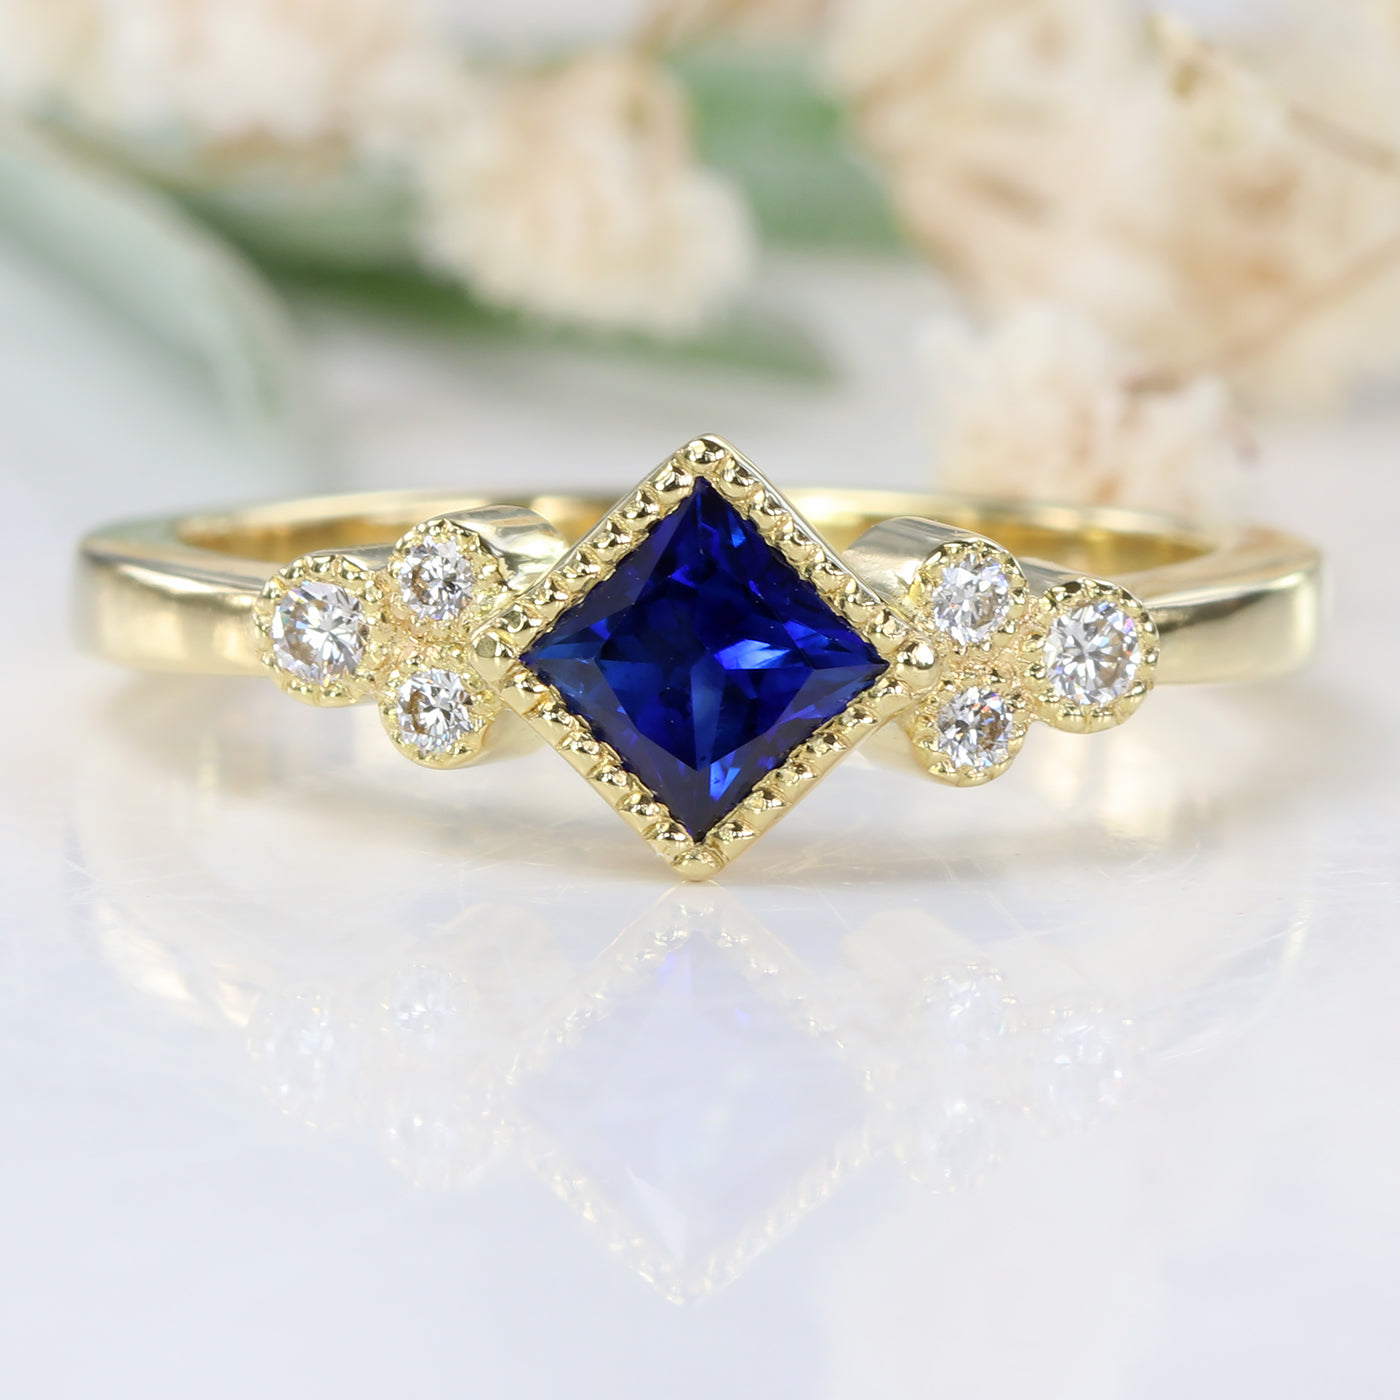 18ct Gold Princess Cut Sapphire and Diamond Cluster Ring (Size L 1/2, Resize I 1/2 - O 1/2)